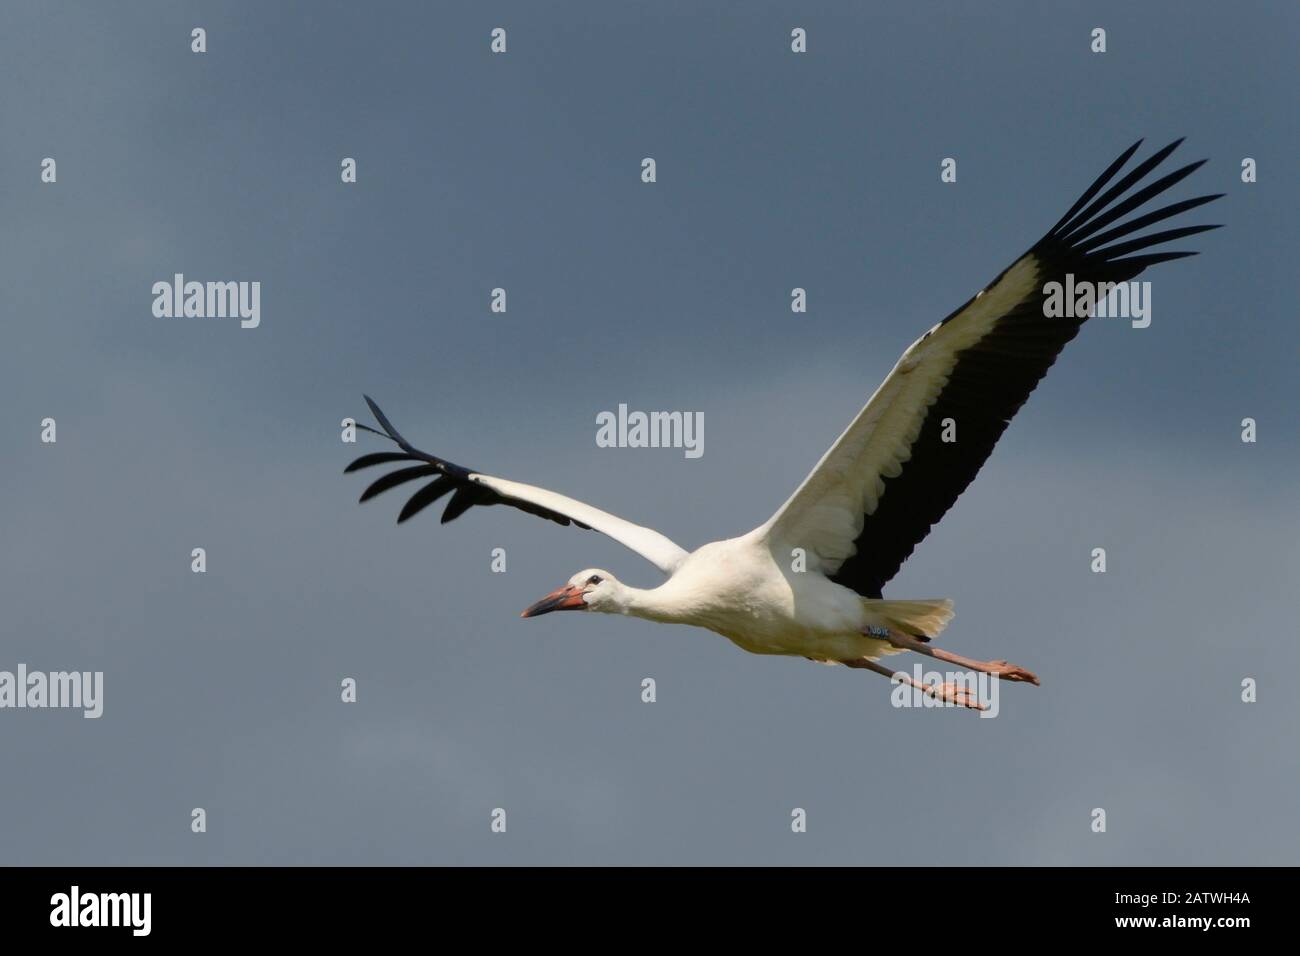 Captive reared juvenile White stork (Ciconia ciconia) in flight over the Knepp Estate soon after release, Sussex, UK, August 2019. Stock Photo